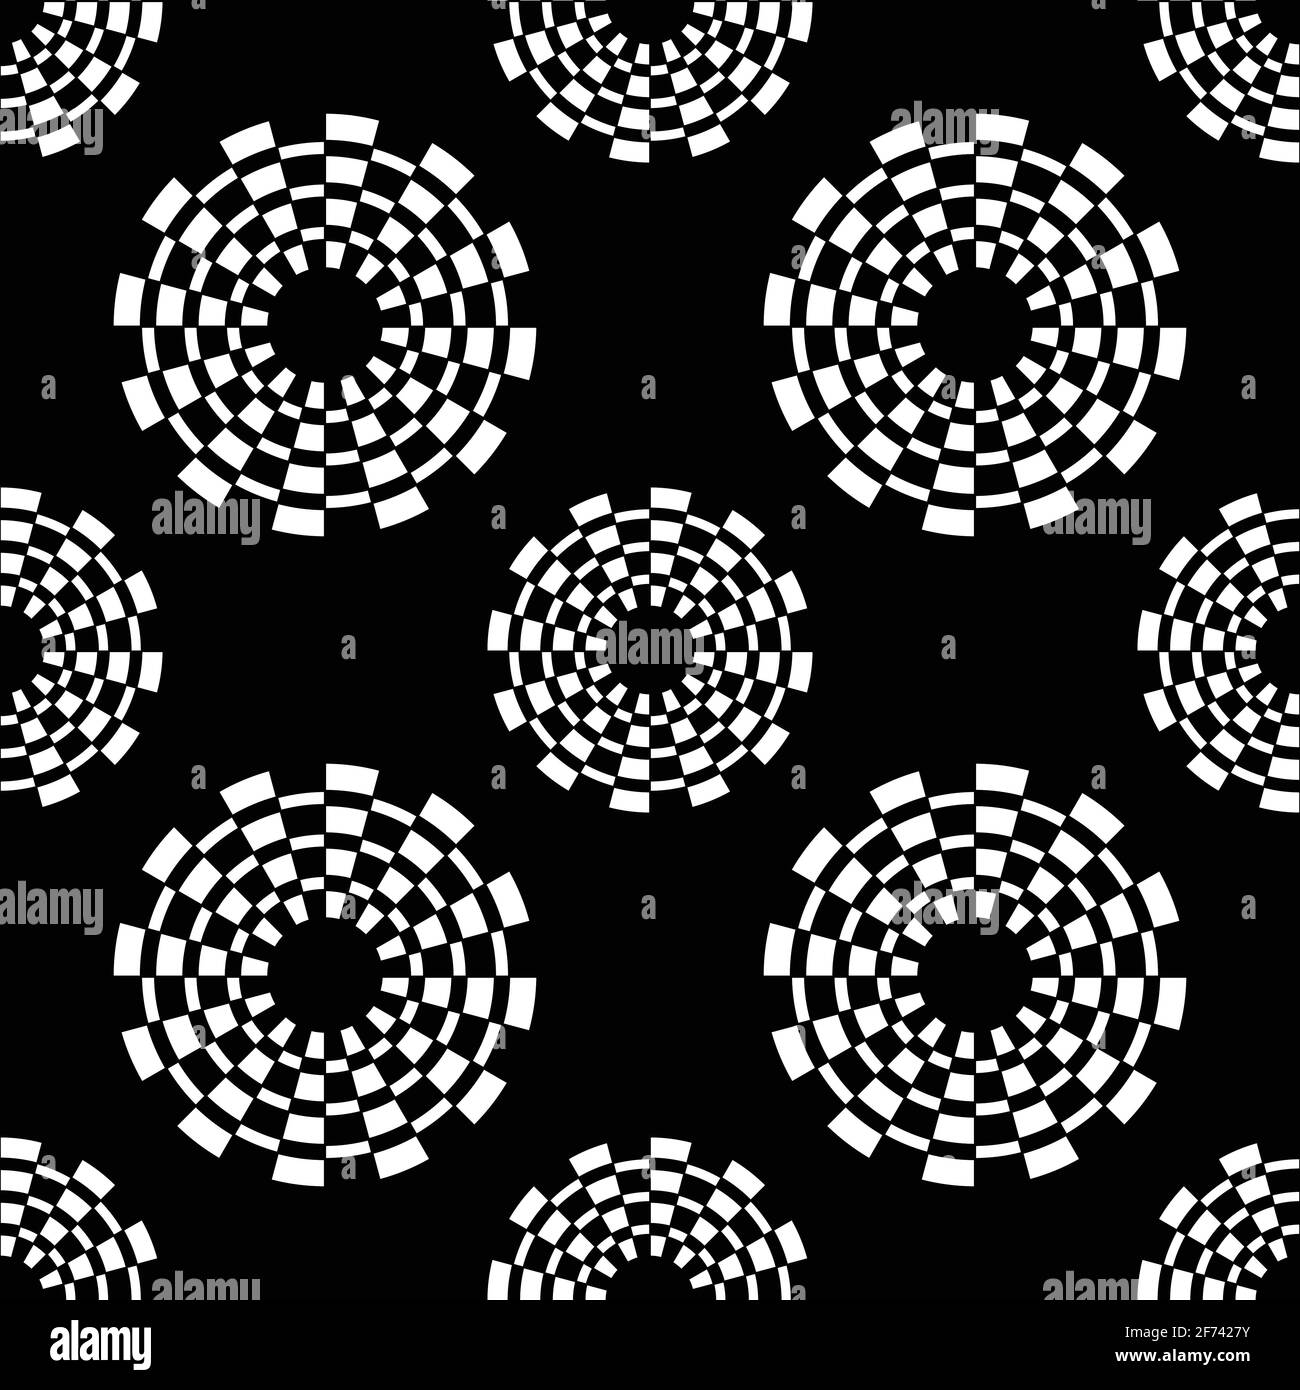 Seamless black and white pattern in the form of abstract circles. vector Stock Vector